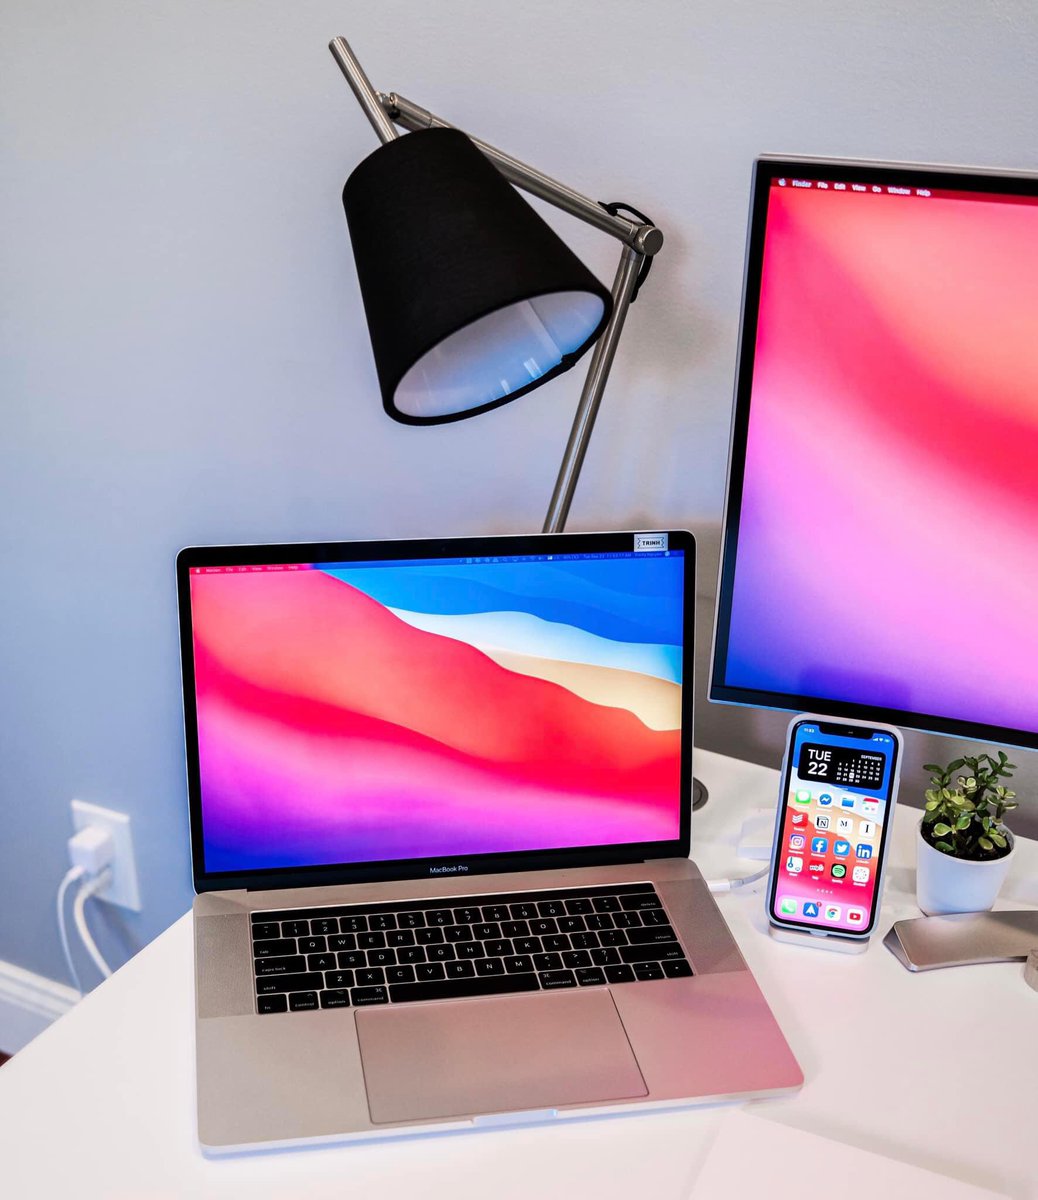 Through UGUNLOCKED, you can purchase any apple products including Apple Watches, iPhones, iPads, iPods, and iMacs, direct from apple.com/store in USA. Enjoy daily offers as you purchase authentic products with guarantee today. Call us in 0774011110 today